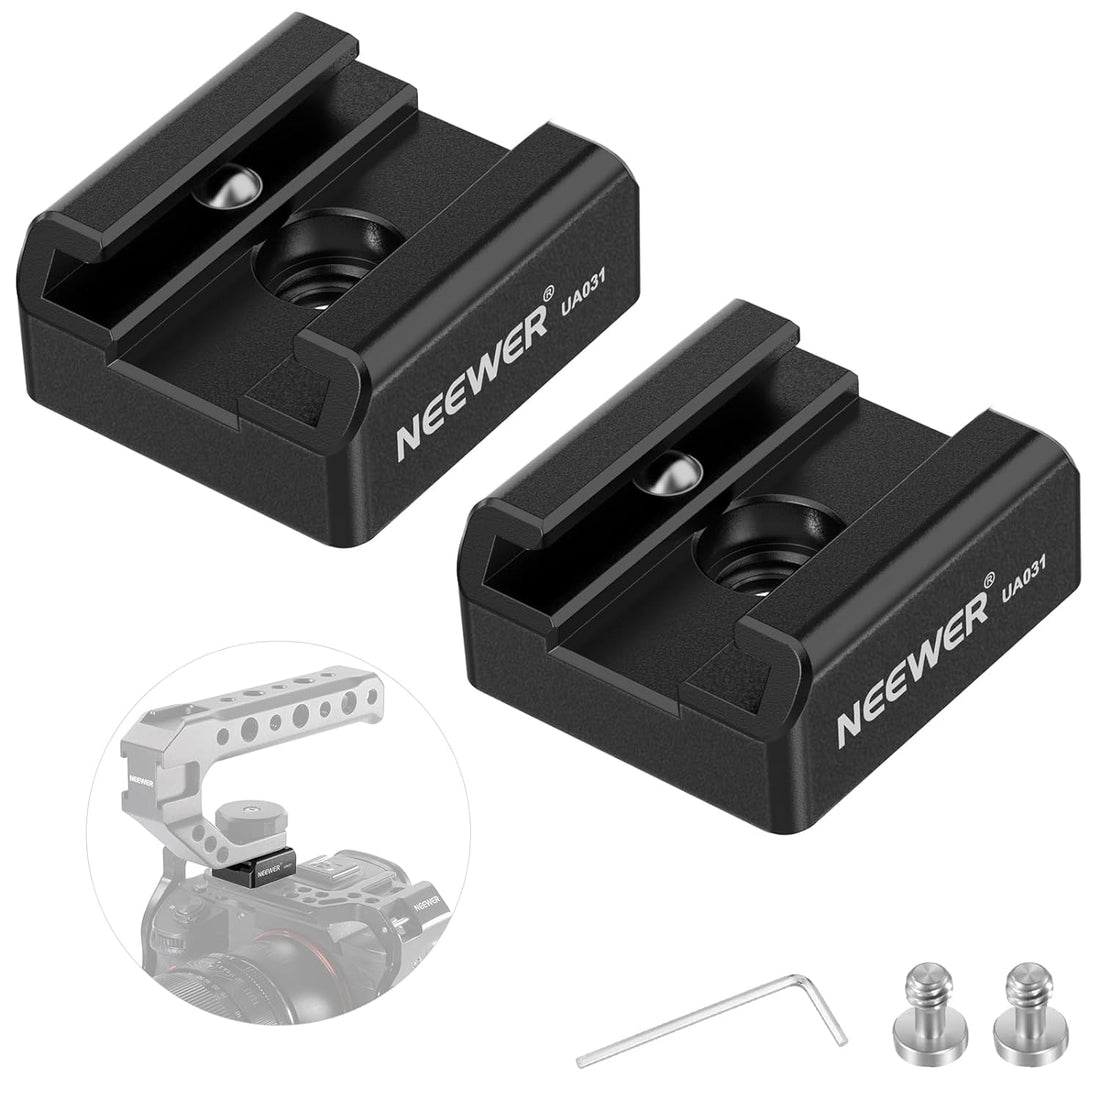 NEEWER 2 Pack Cold Shoe Mount Adapter with 1/4" Screws for Flash LED Light Monitor Microphone, Aluminum Shoe Mount with Anti Twist Pins Non Slip Pads Compatible with SmallRig Cage Top Handles, UA031